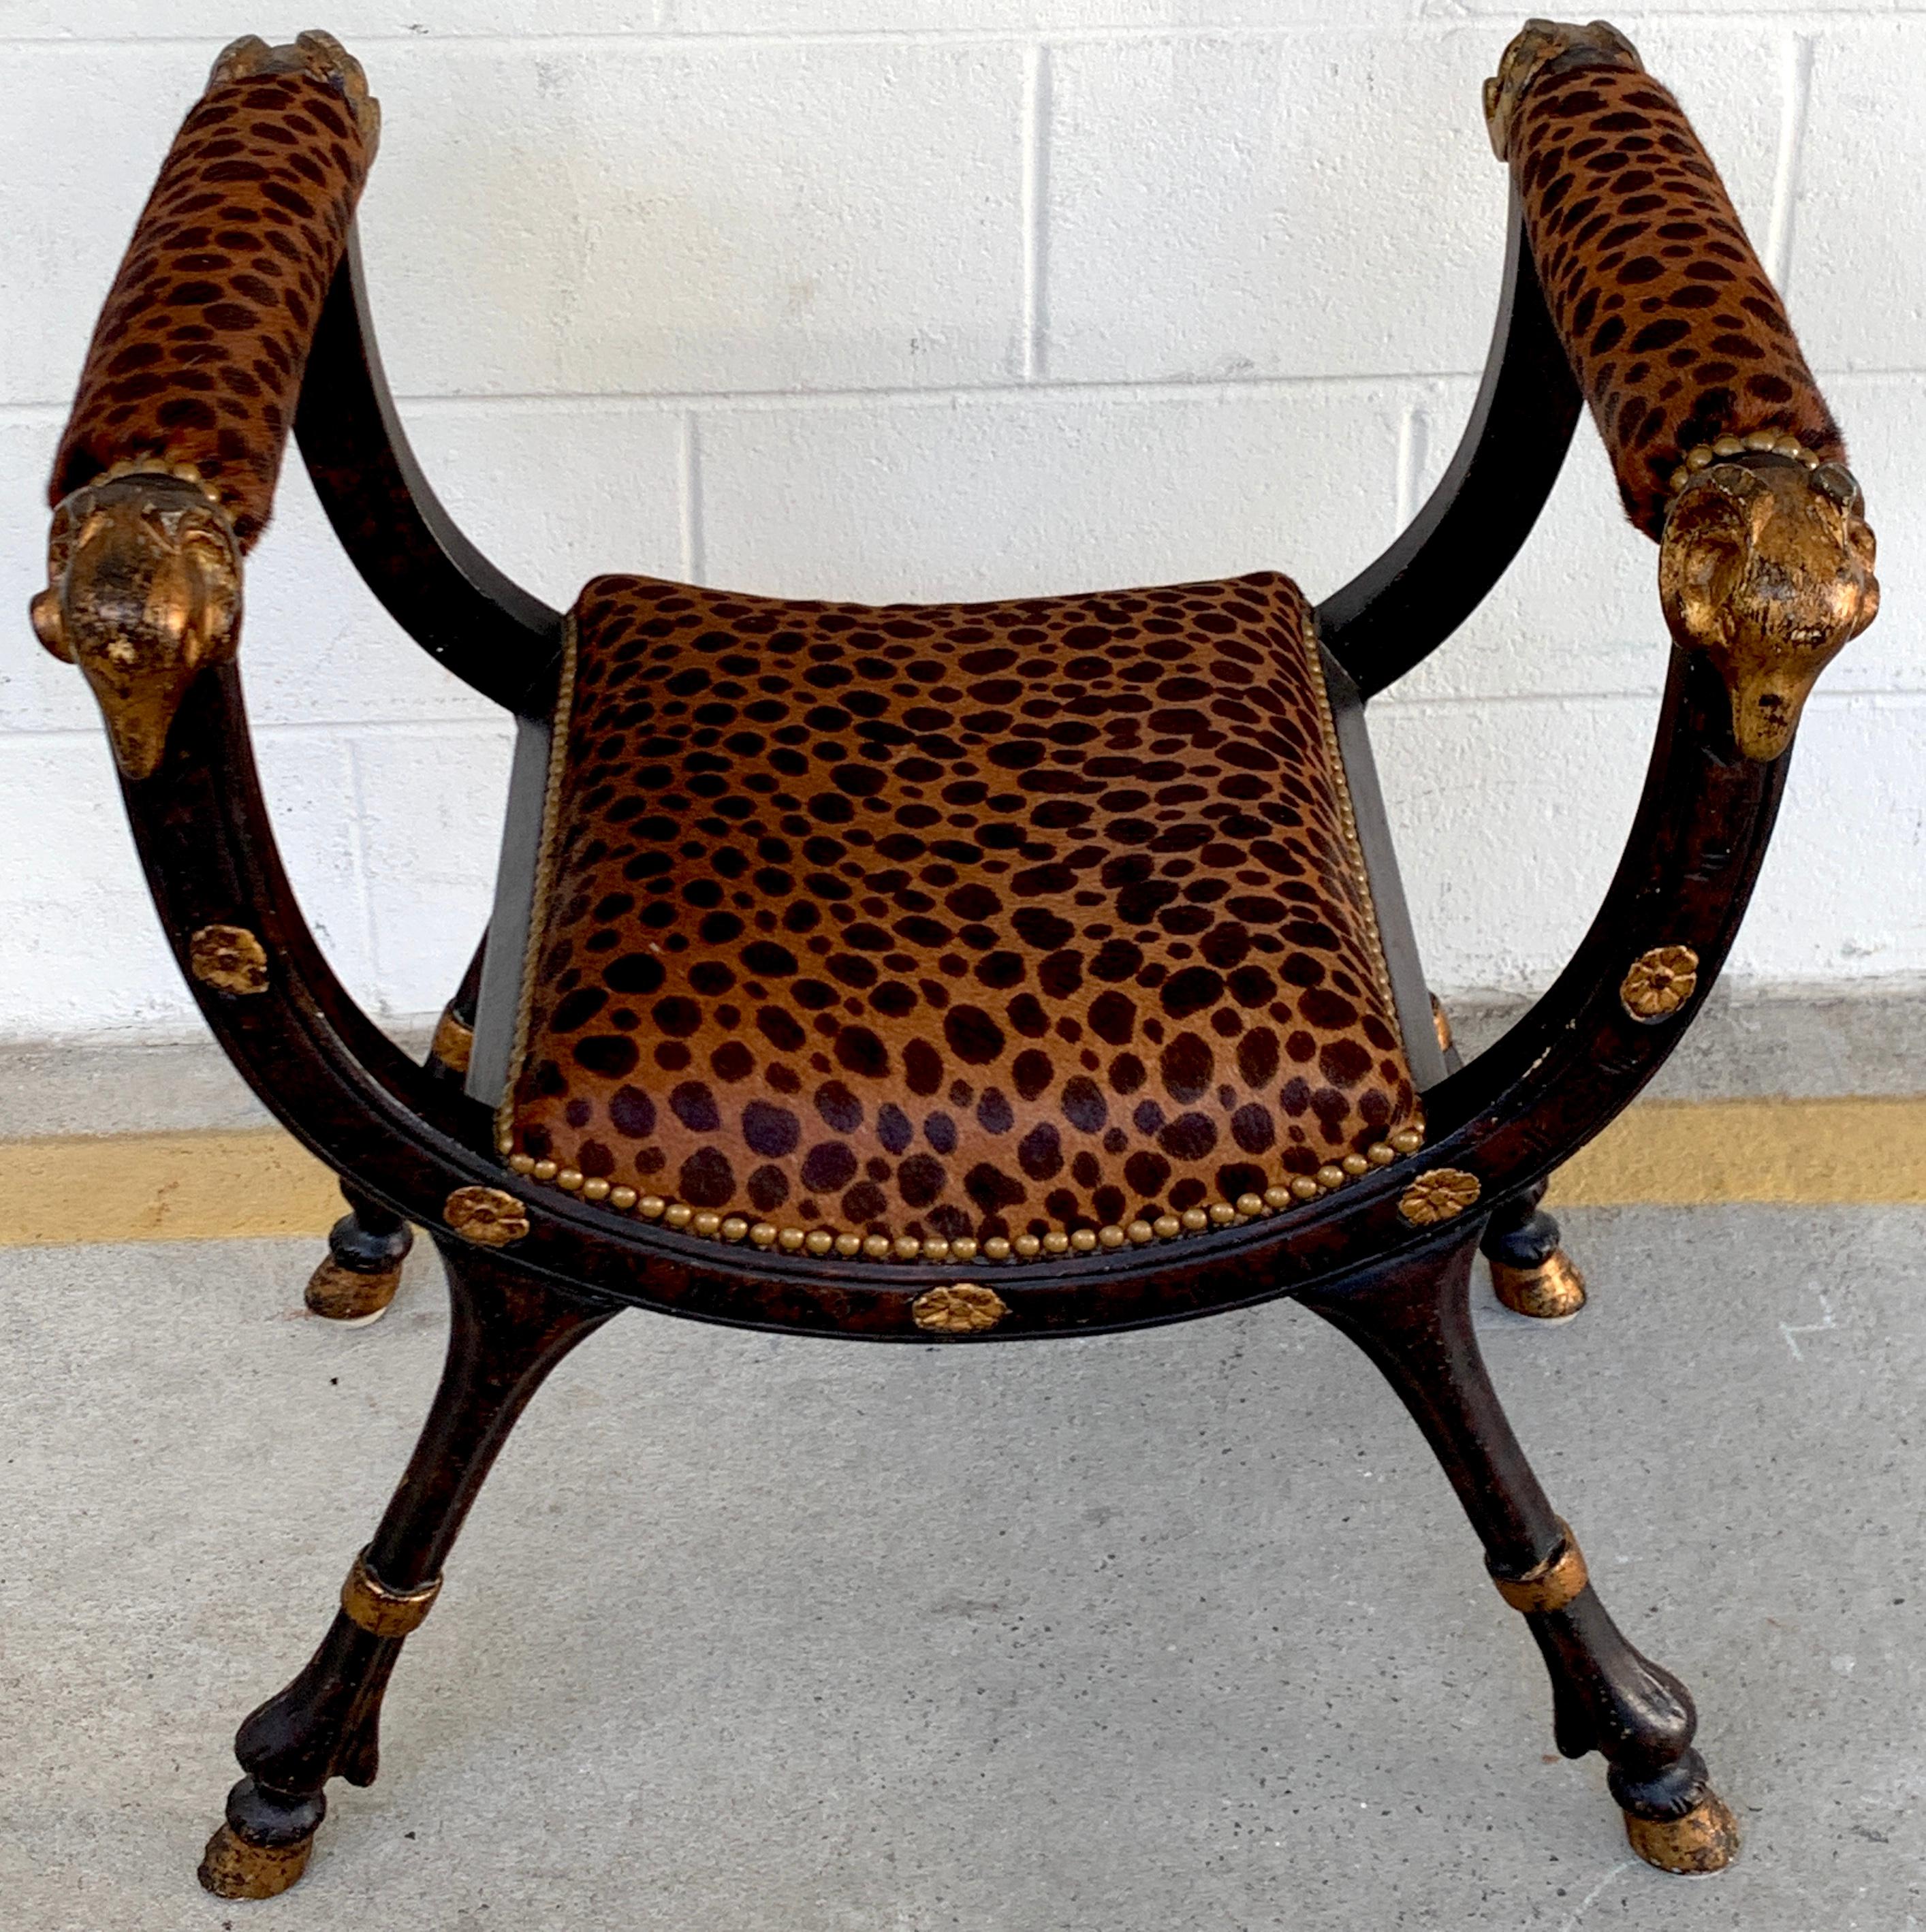 19th century Rams Head curule bench, of typical form with recently upholstered animal print cowhide seat and armrests, raised on four hoof legs. The seat measures 16